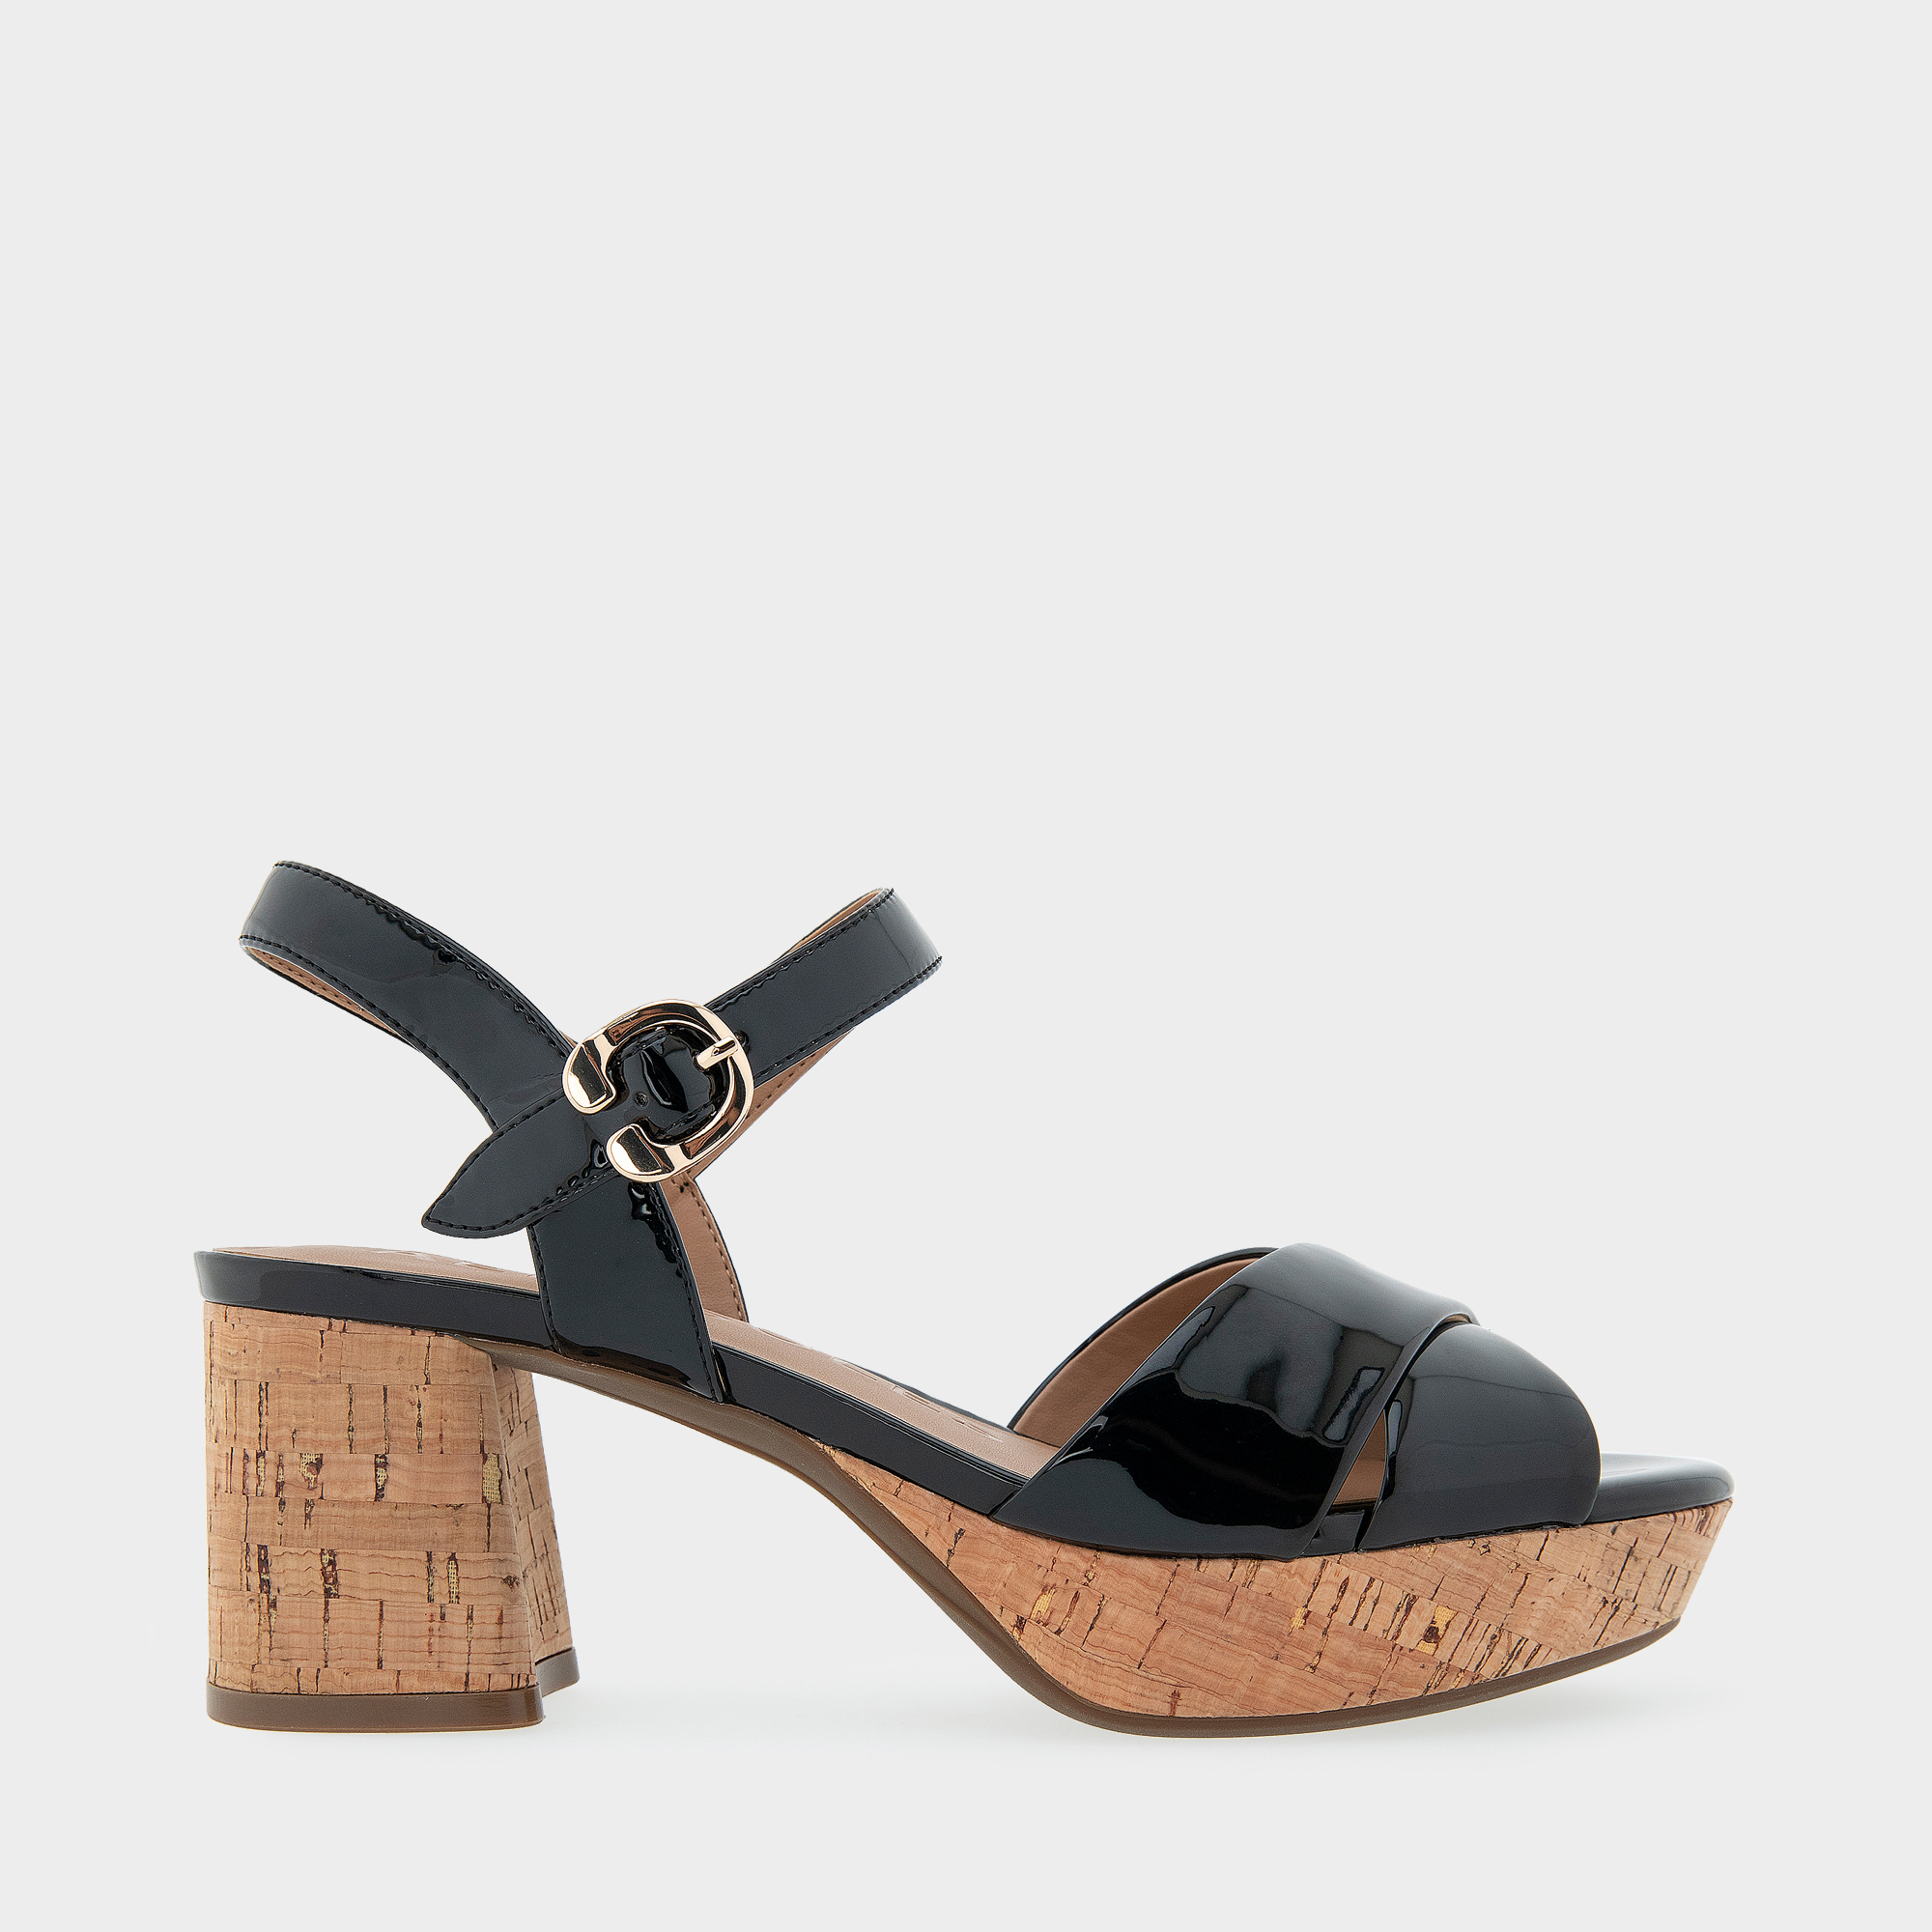 Cosmos Sandal in Black Patent Faux Leather